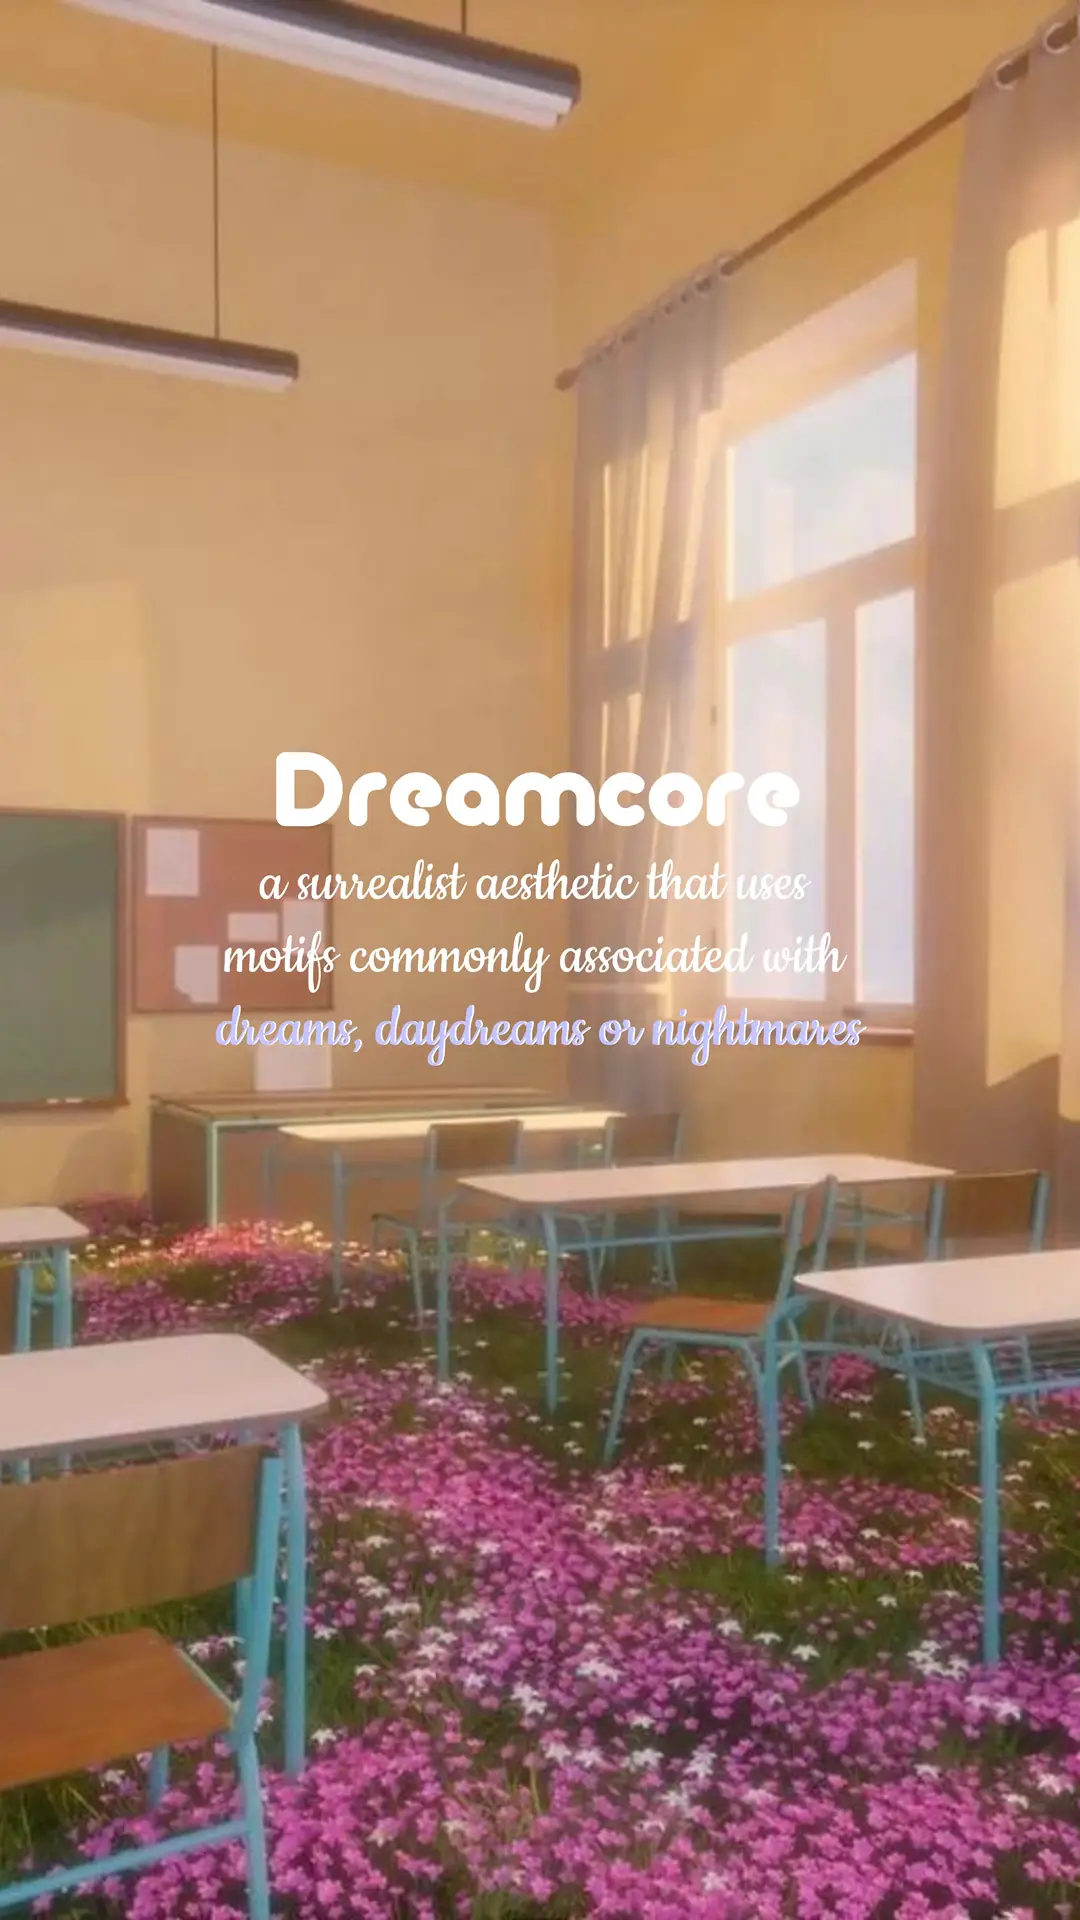 I don't think Dreamcore and Dreamy is the same aesthetic